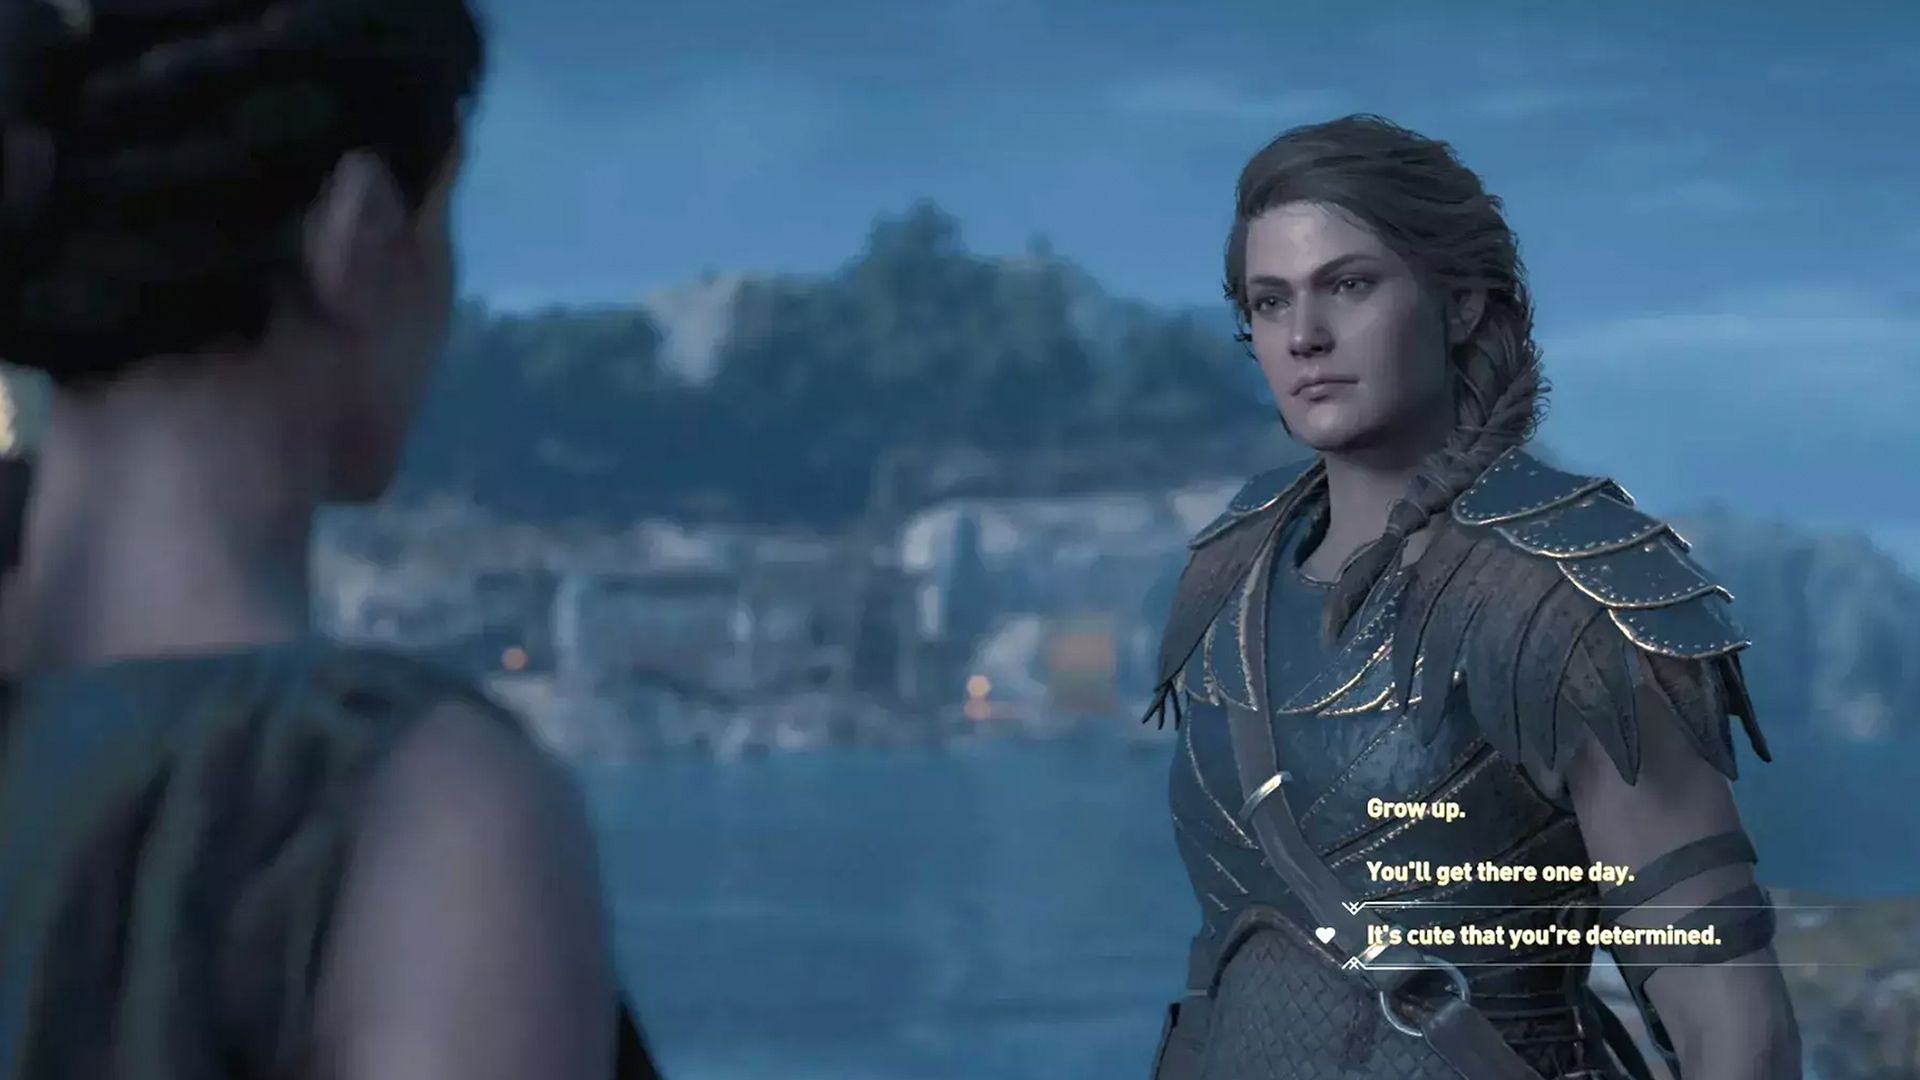 Screenshot from Assassin's Creed Odyssey shows a character of a man and a woman.